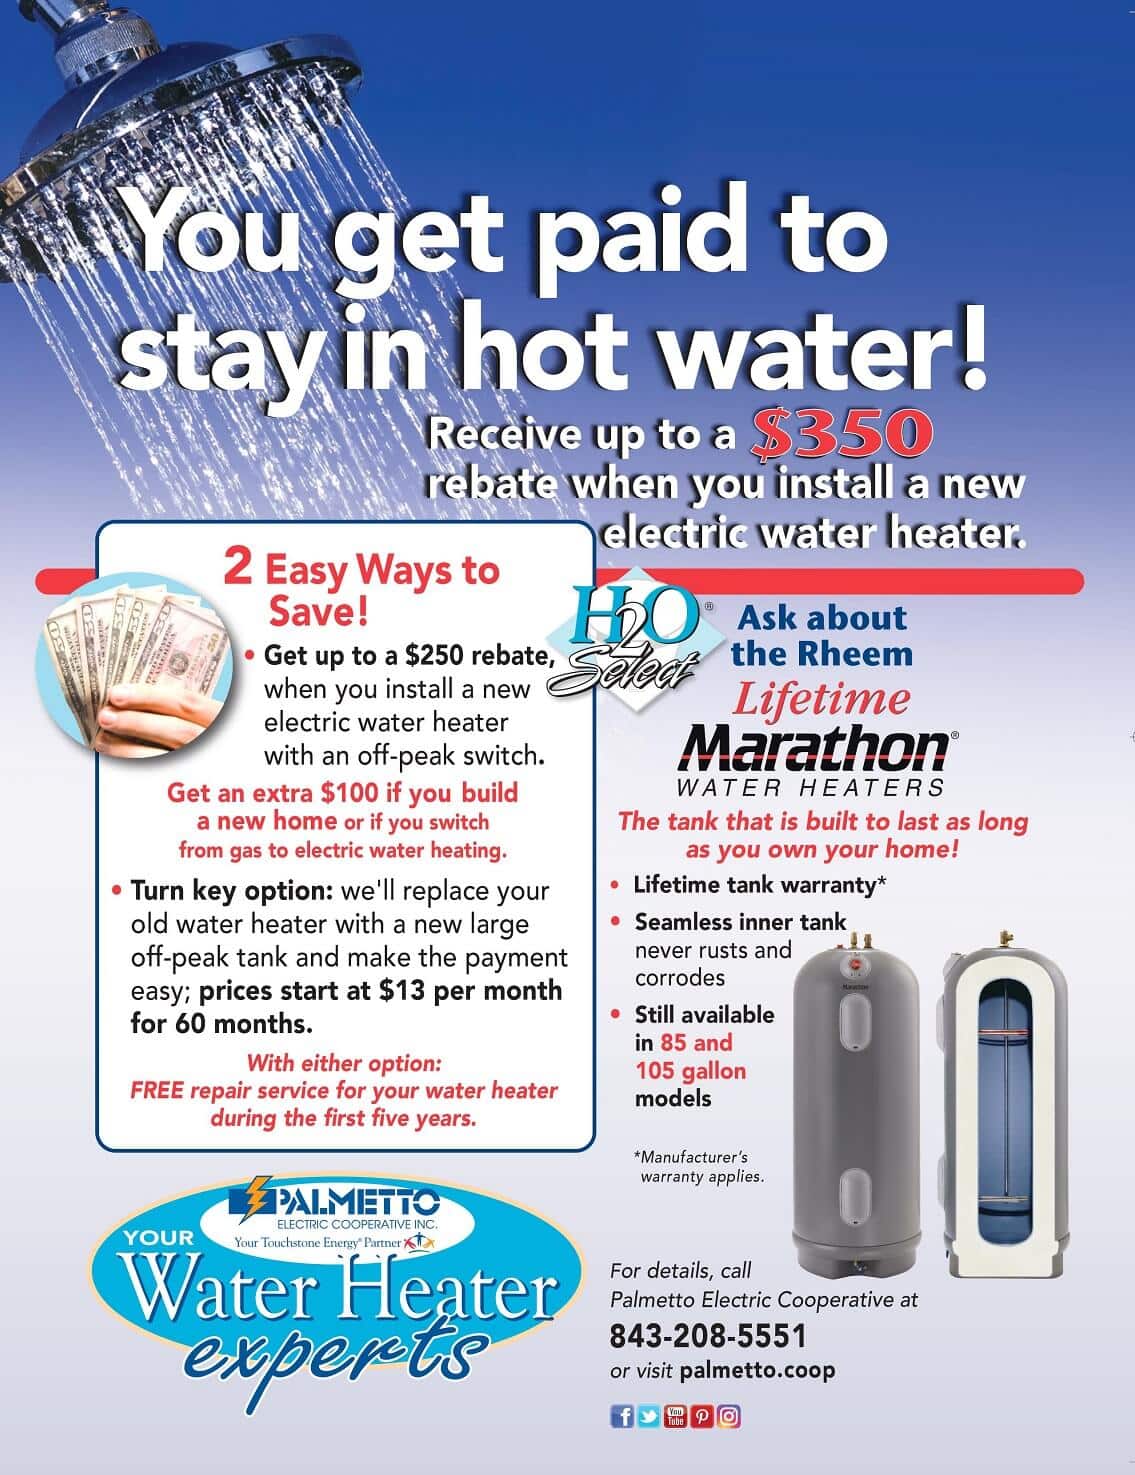 350-rebate-on-your-new-hot-water-heater-lowcountry-home-magazine